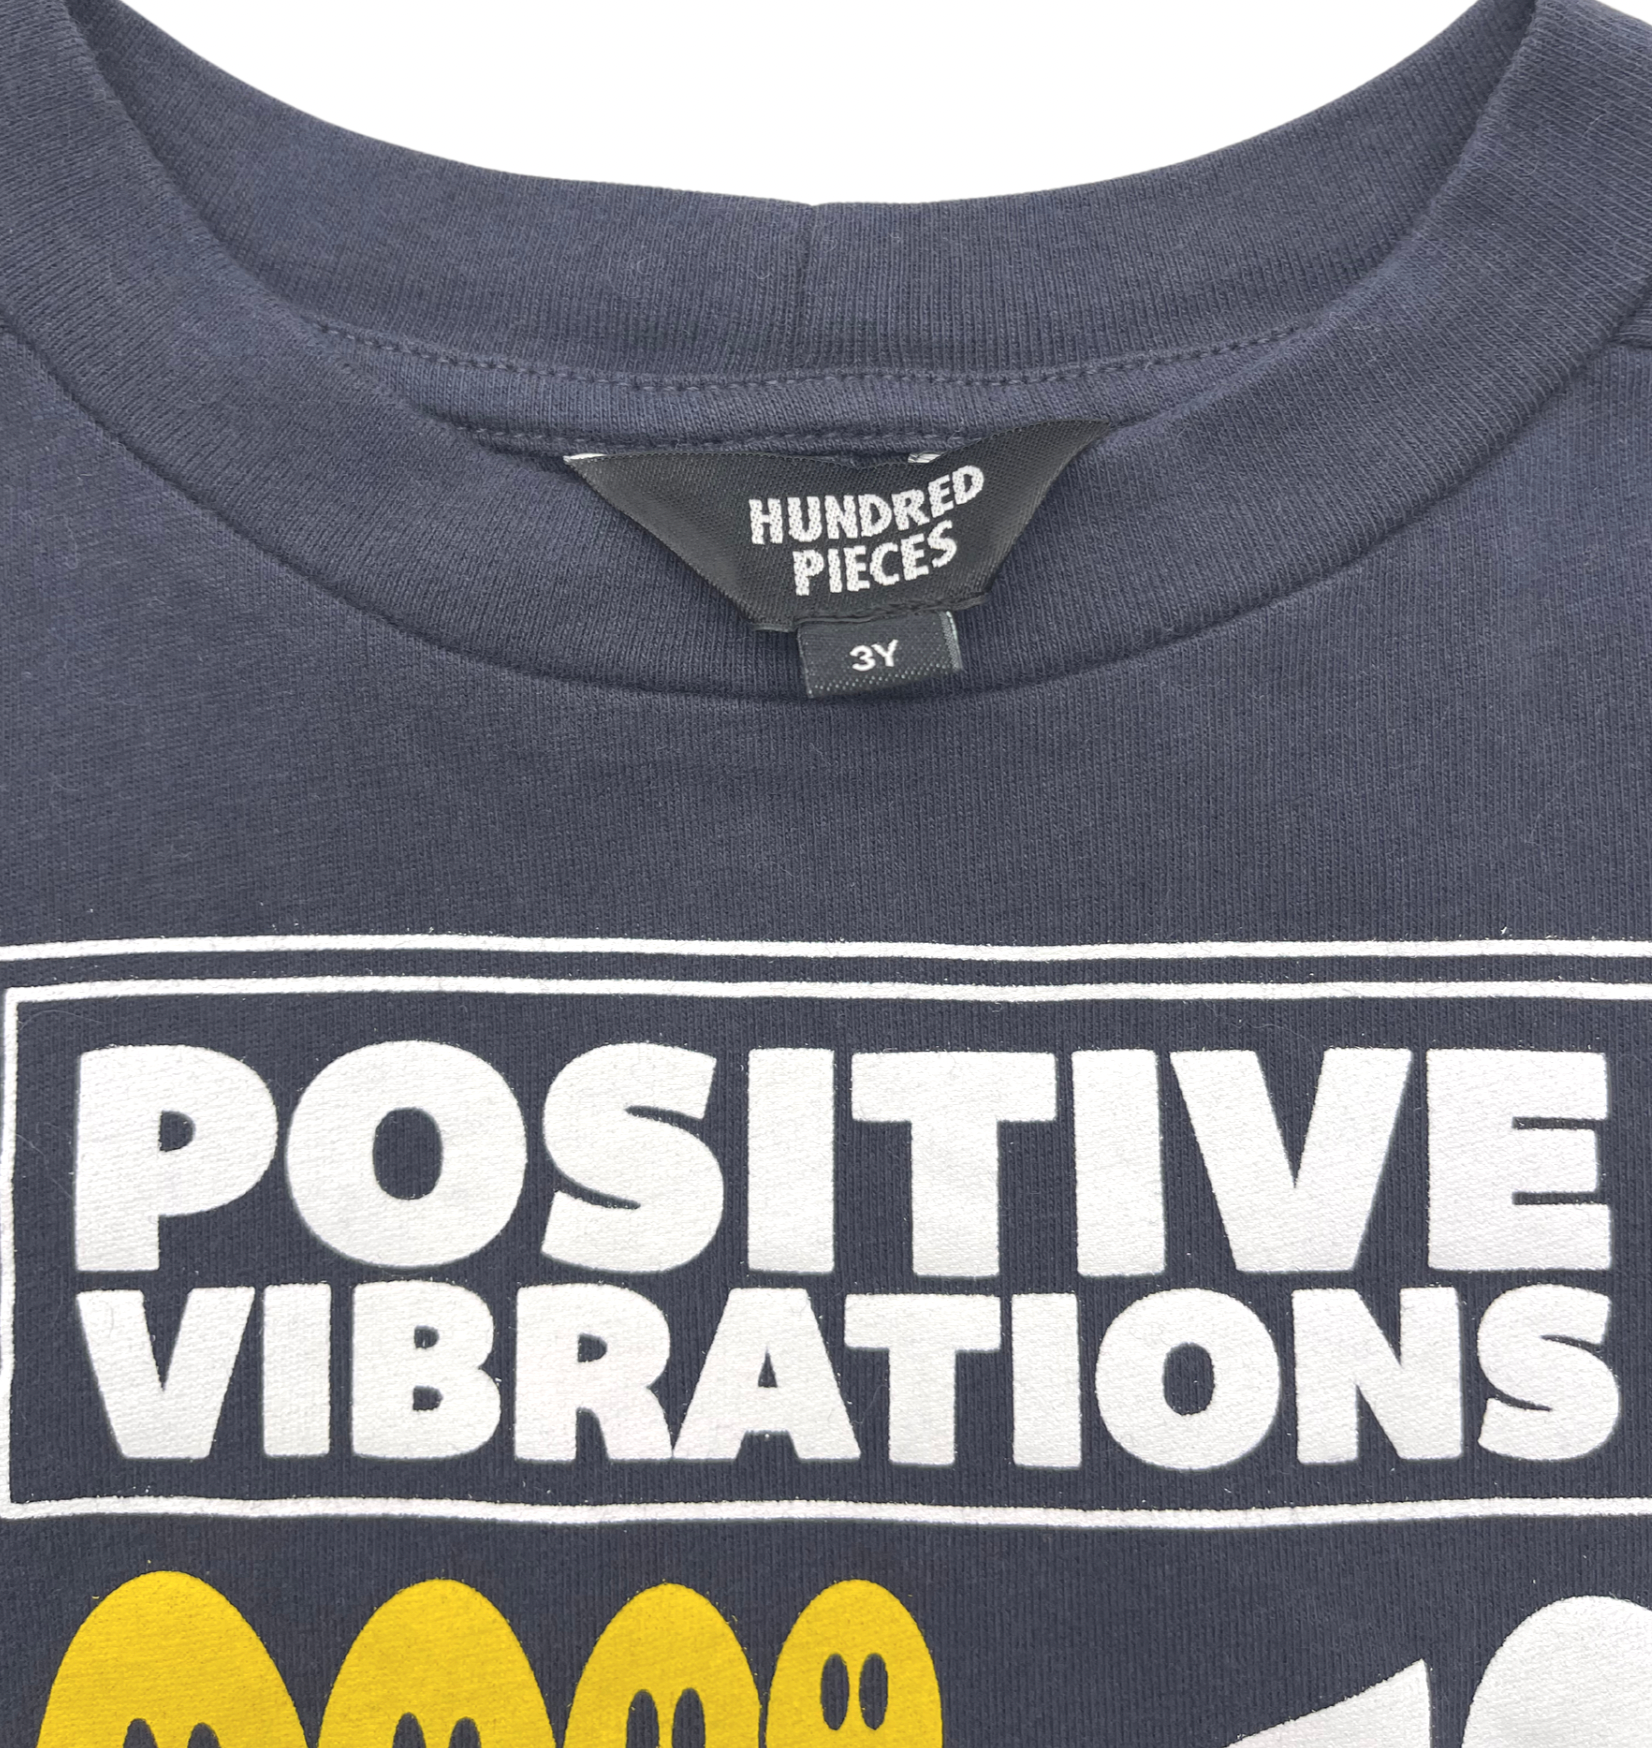 HUNDRED PIECES - "Positive vibrations" T-shirt - 3 years old